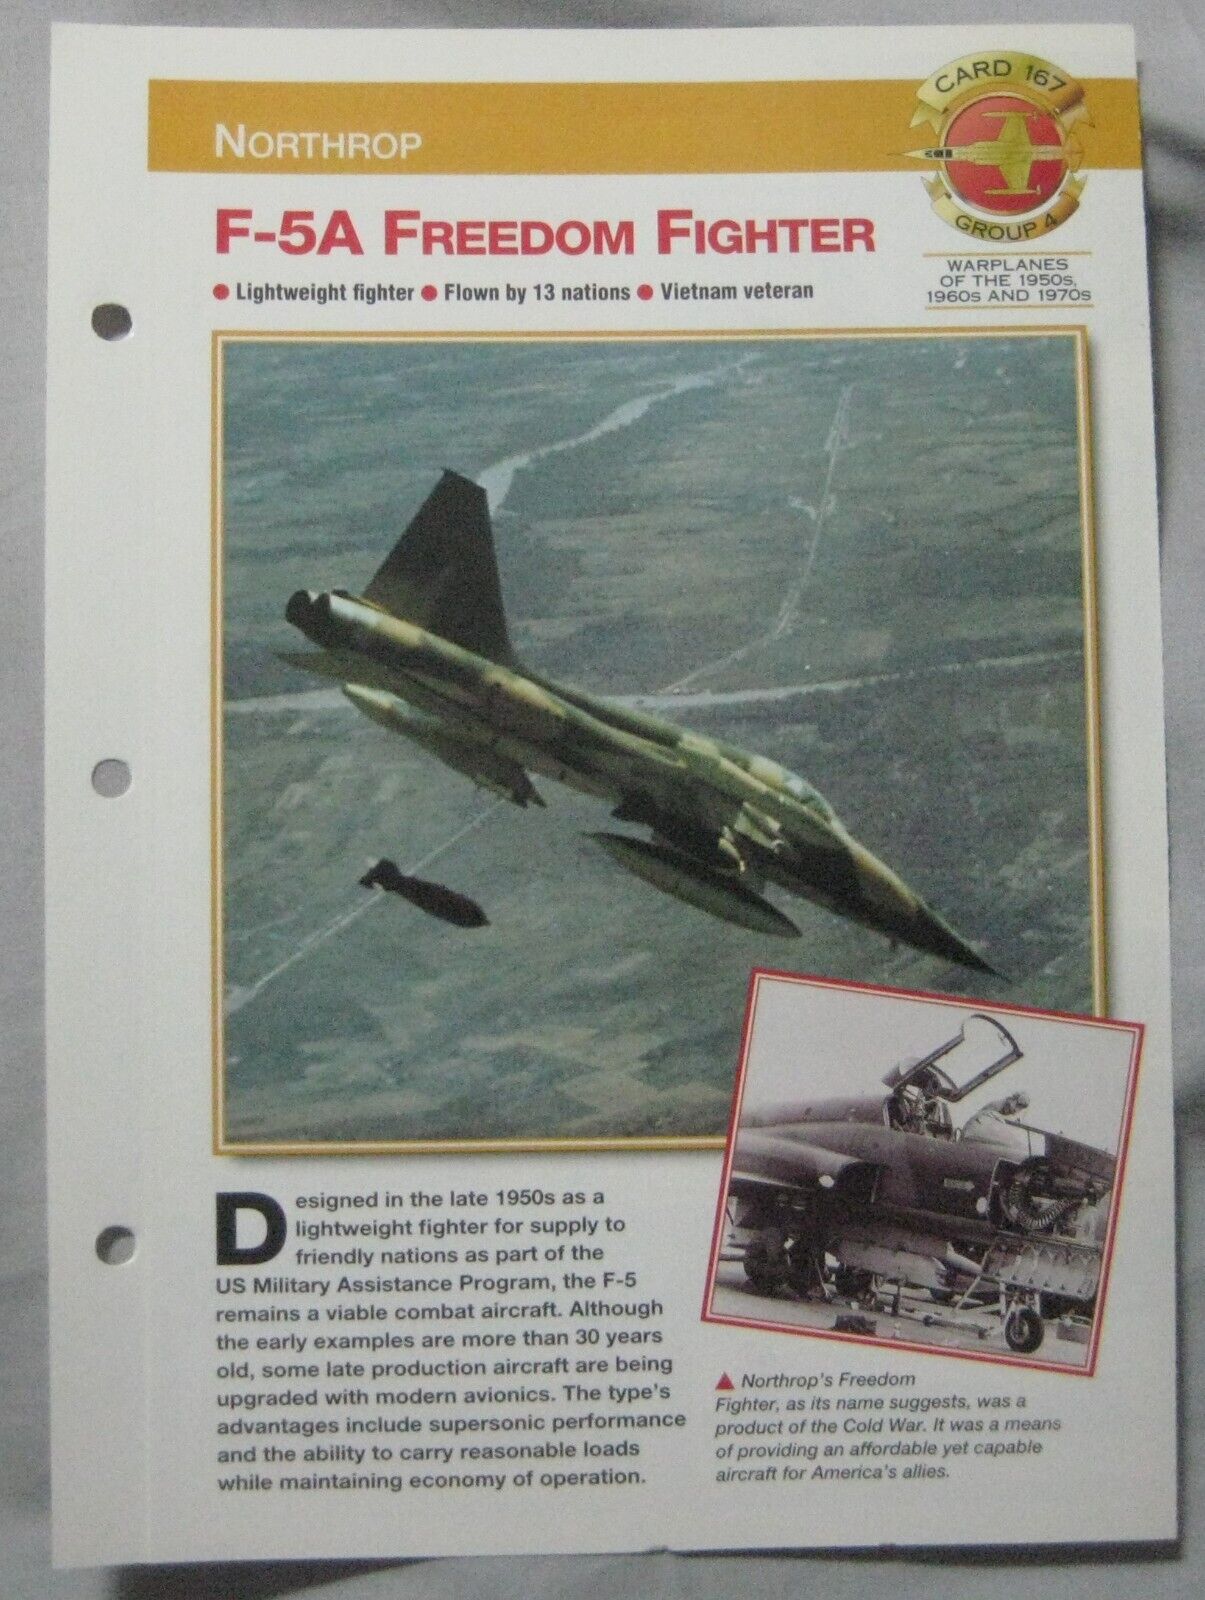 Aircraft of the World Card 167 , Group 4 - Northrop F-5A Freedom Fighter